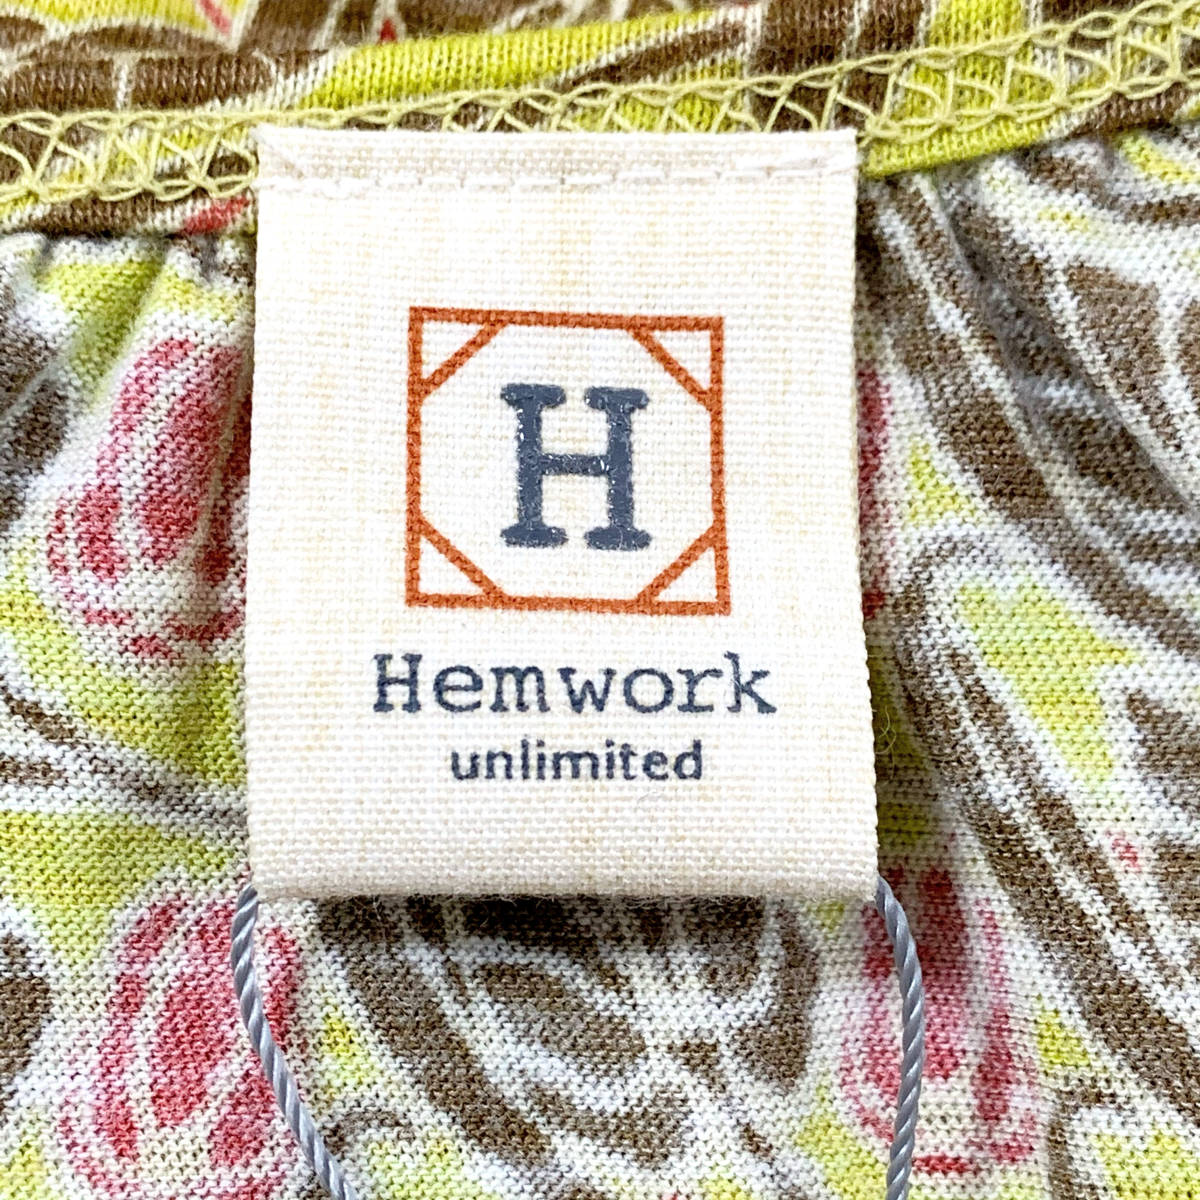  new goods * Hemwork Hem Work * cut and sewn total pattern T-shirt long T design pull over thin crew neck ethnic peace pattern Asian plant 